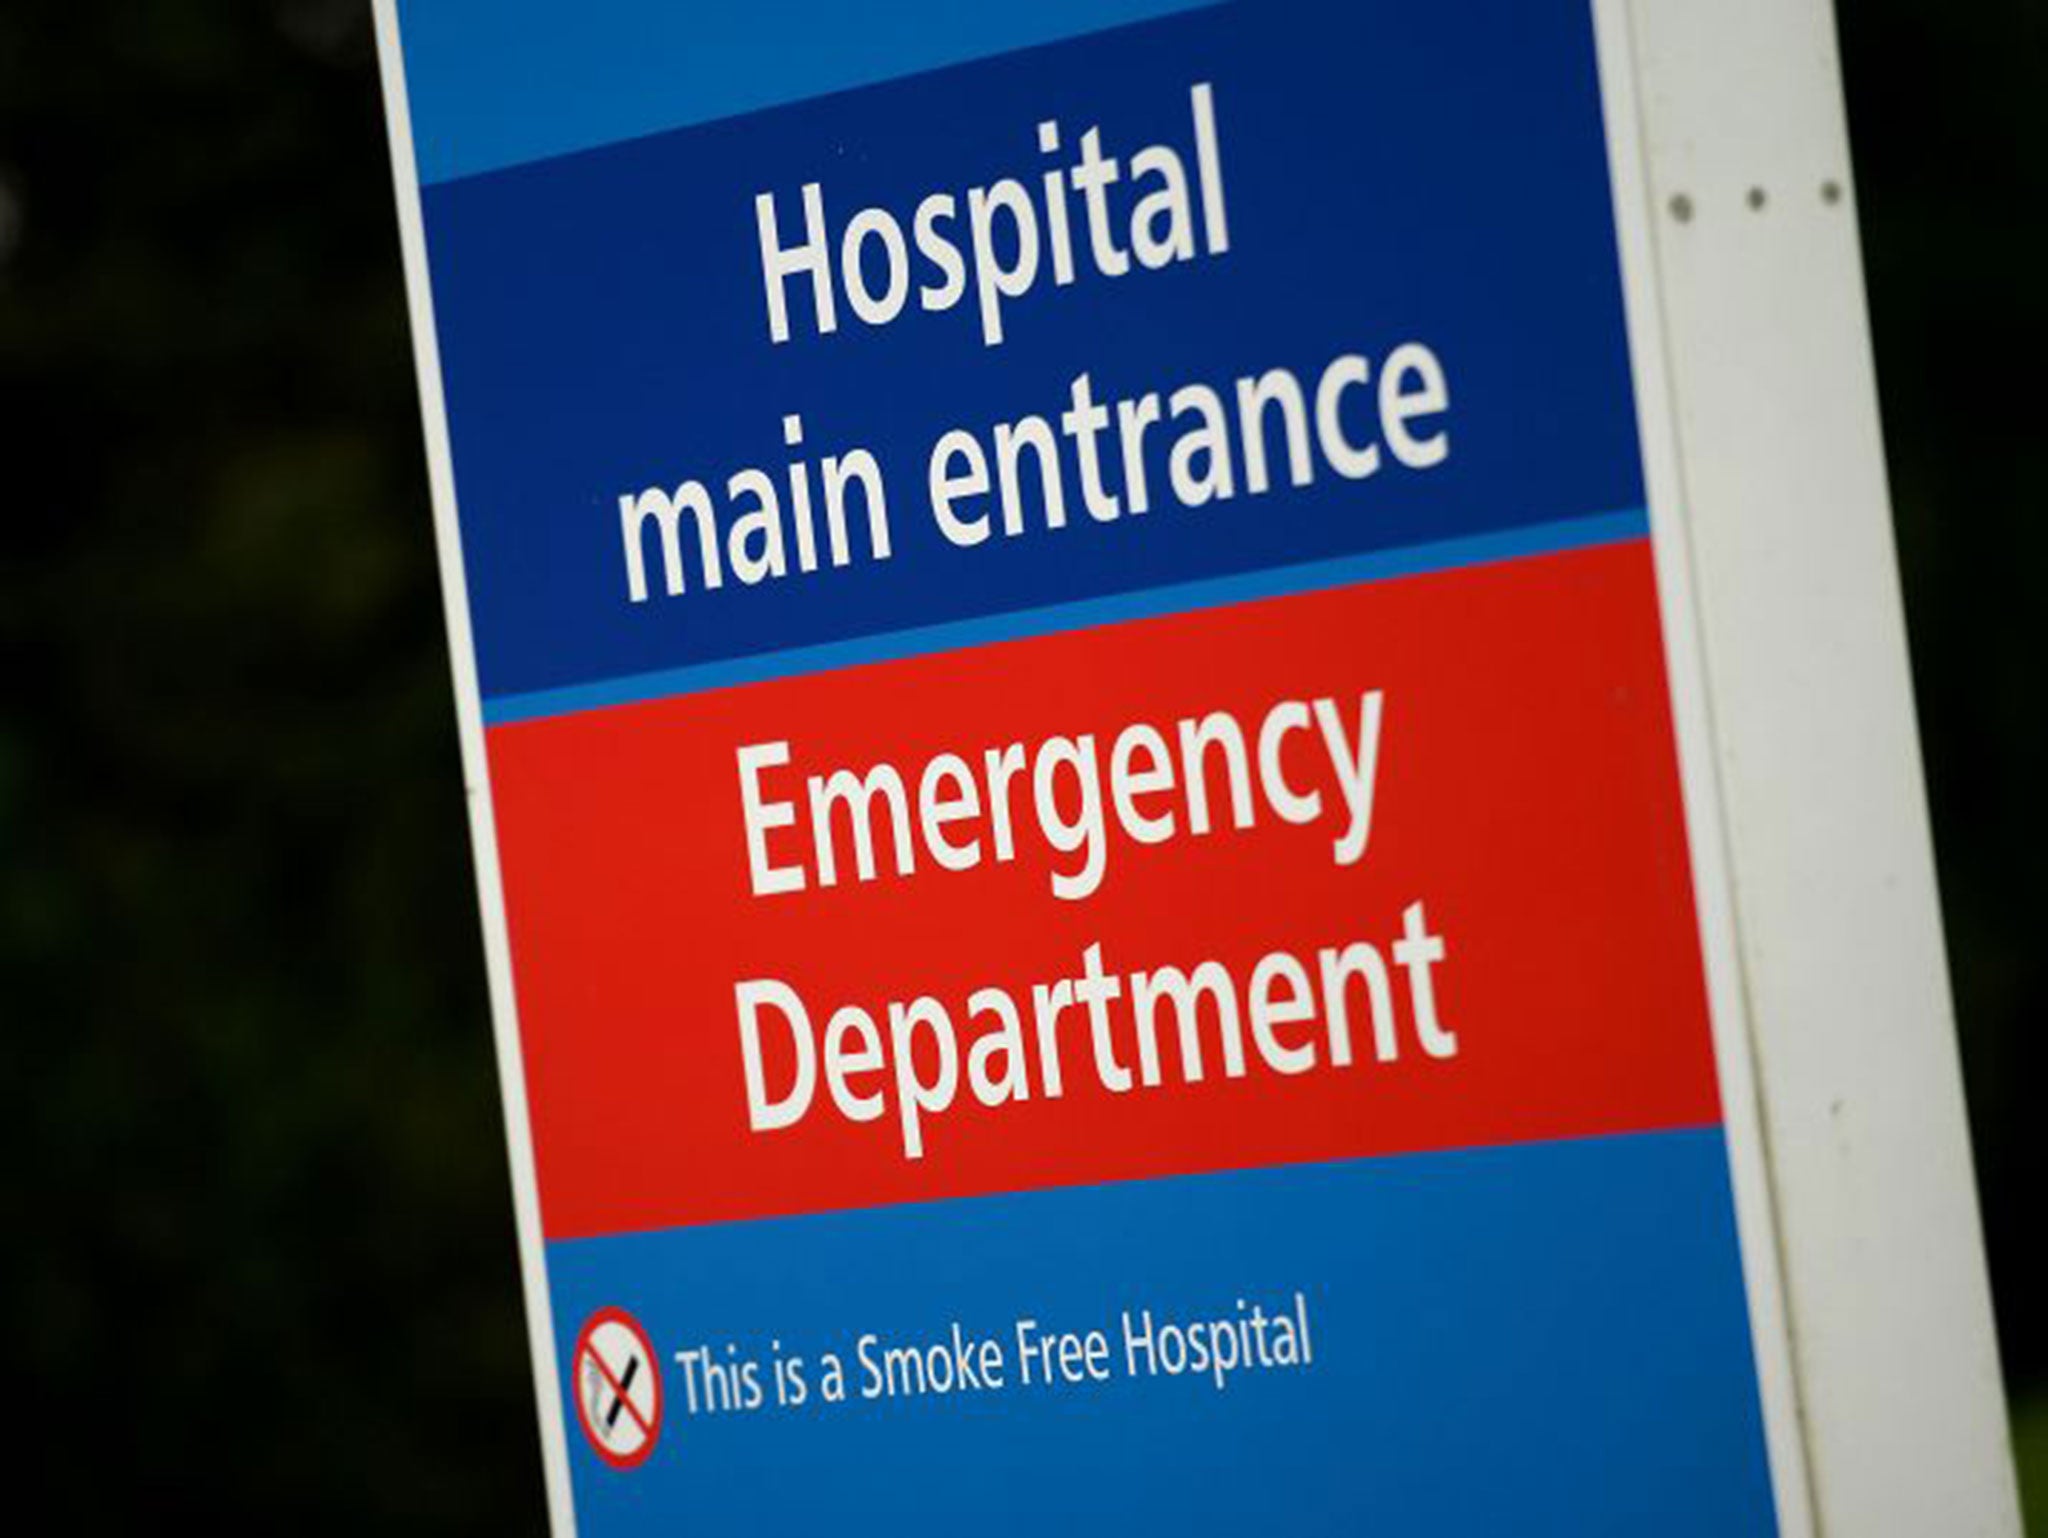 File photo dated 11/3/2014 of signage for the main entrance and emergency department at a hospital